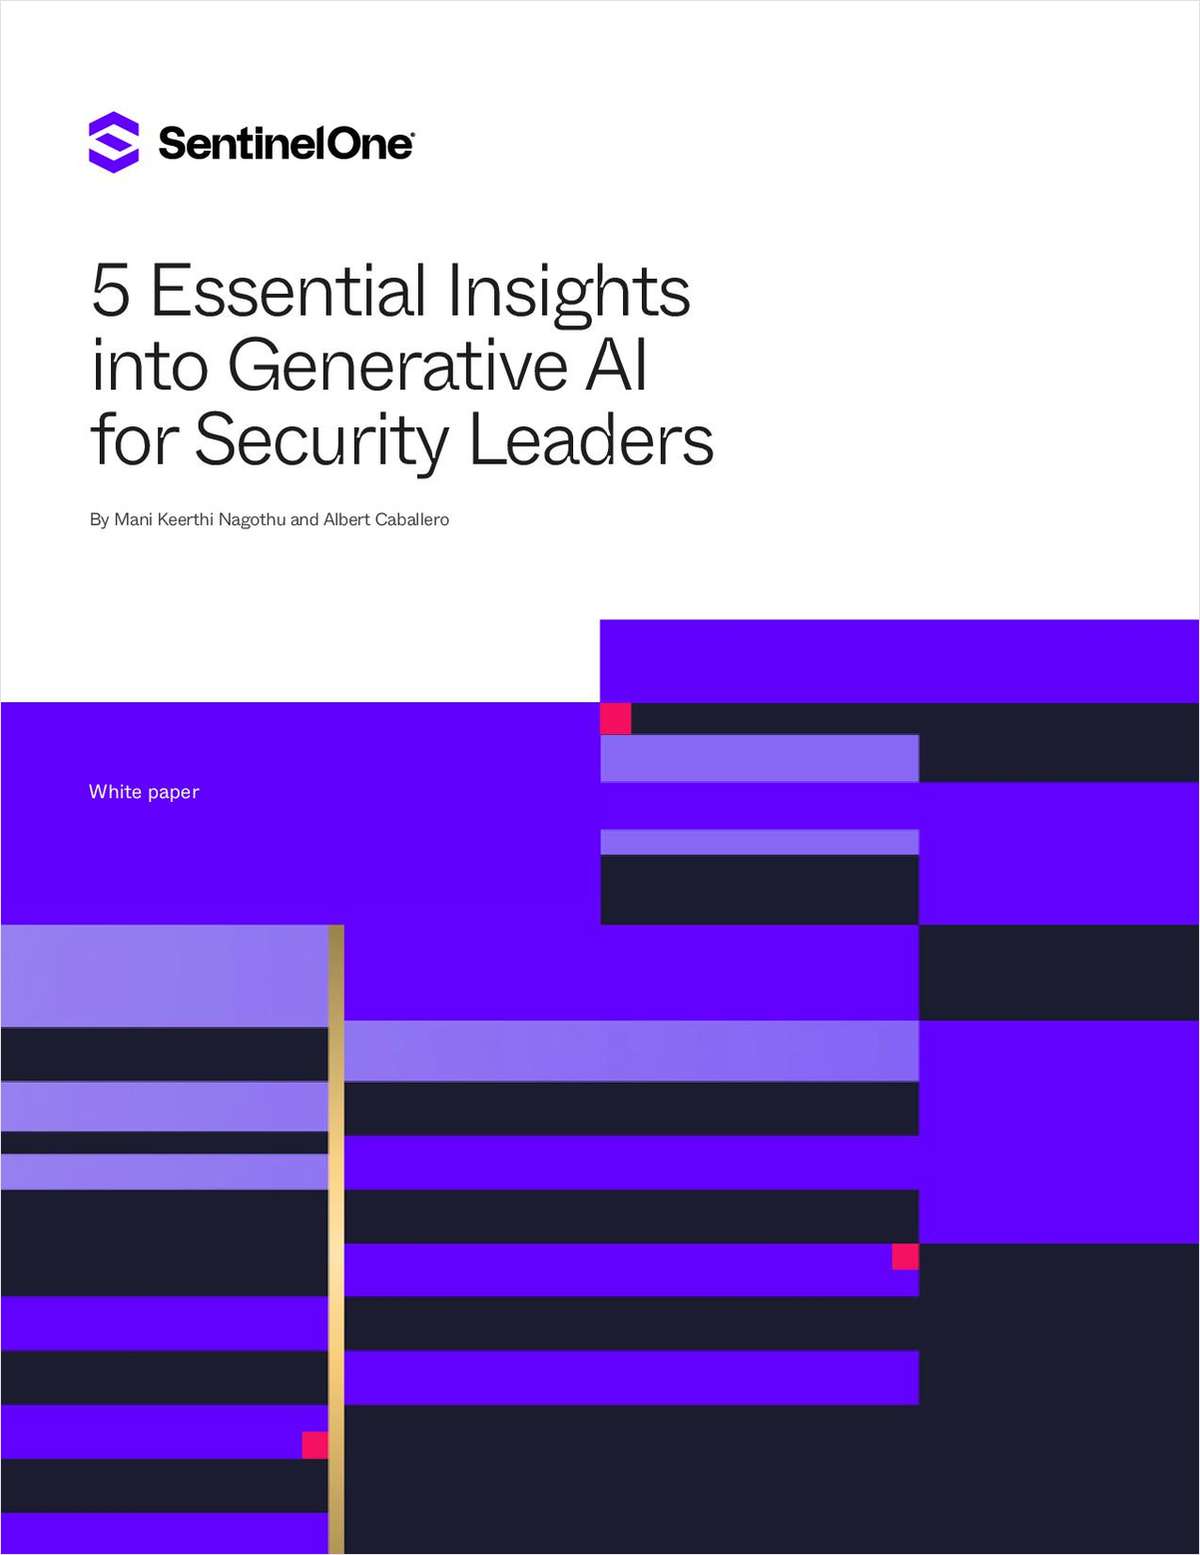 5 Essential Insights into Generative AI for Security Leaders